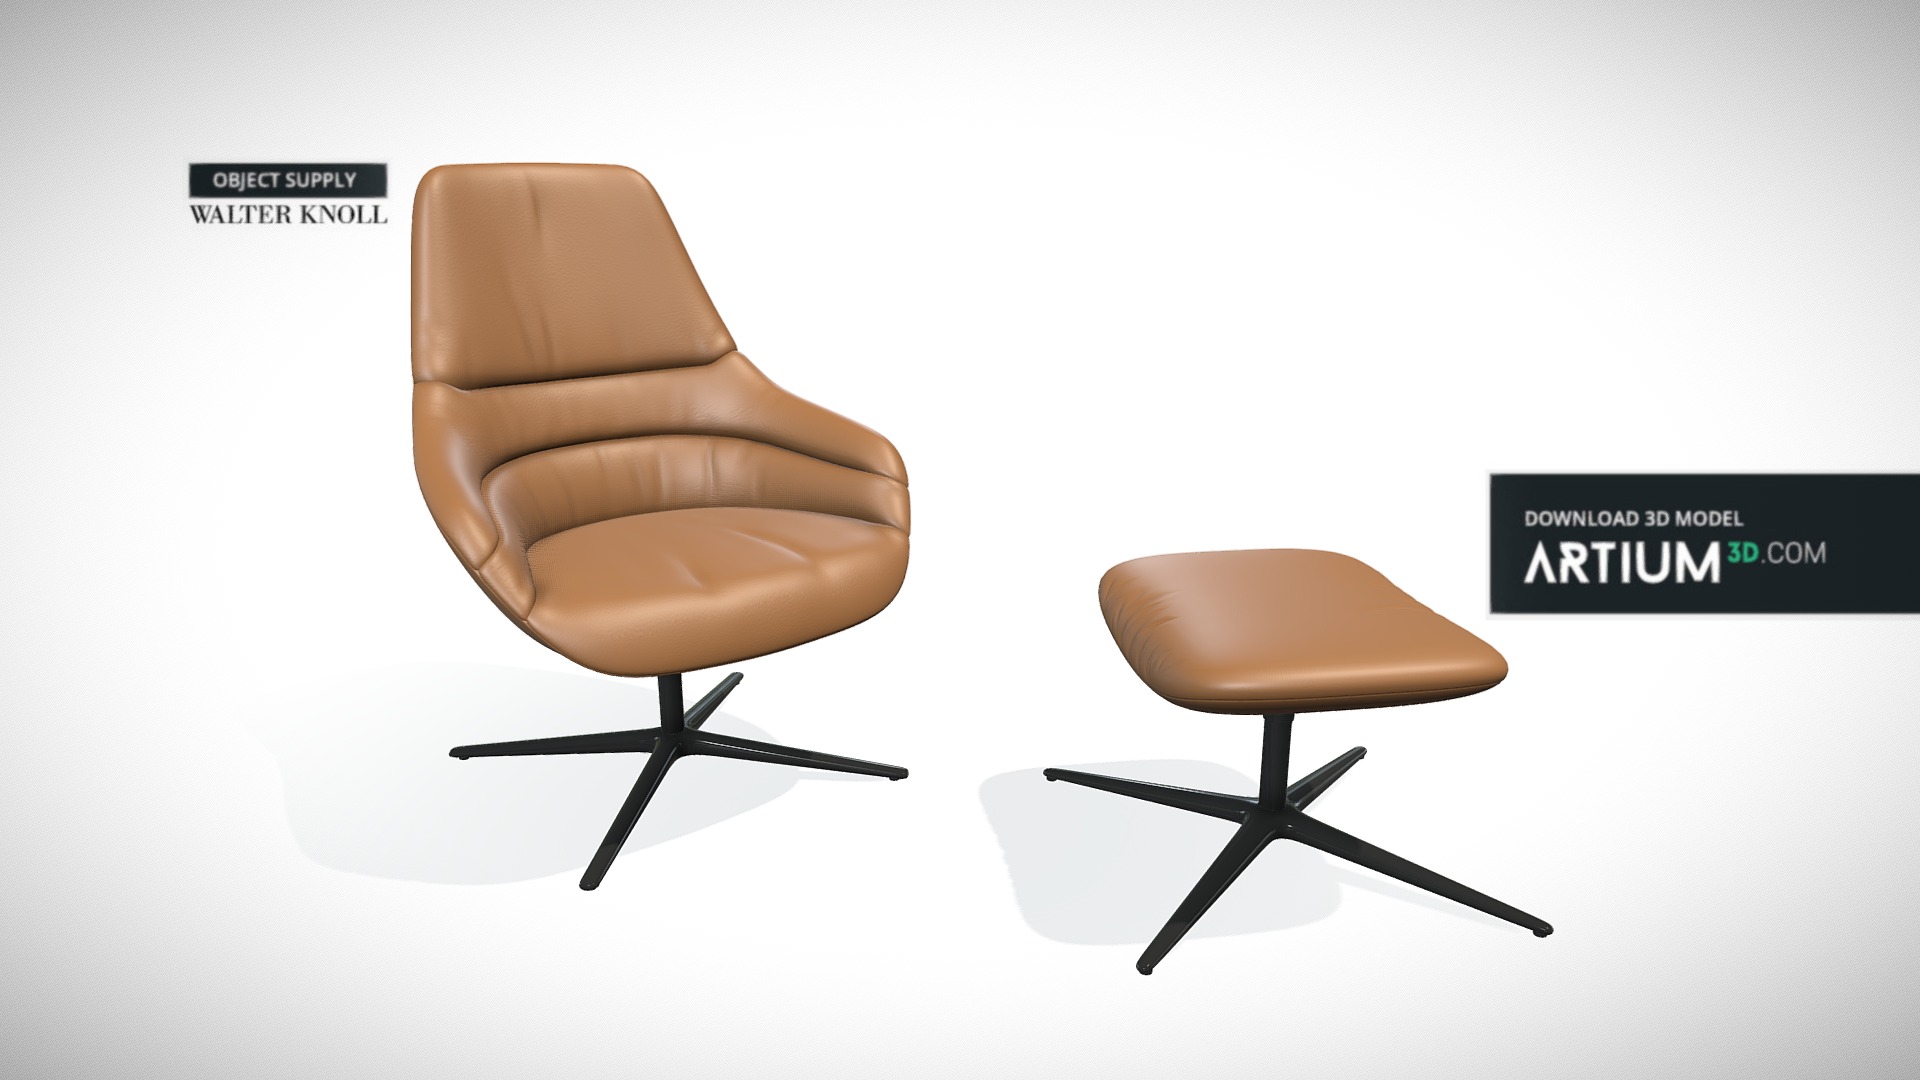 3D model Armchair and Tabouret from Walter Knoll - This is a 3D model of the Armchair and Tabouret from Walter Knoll. The 3D model is about a brown chair with a black back.